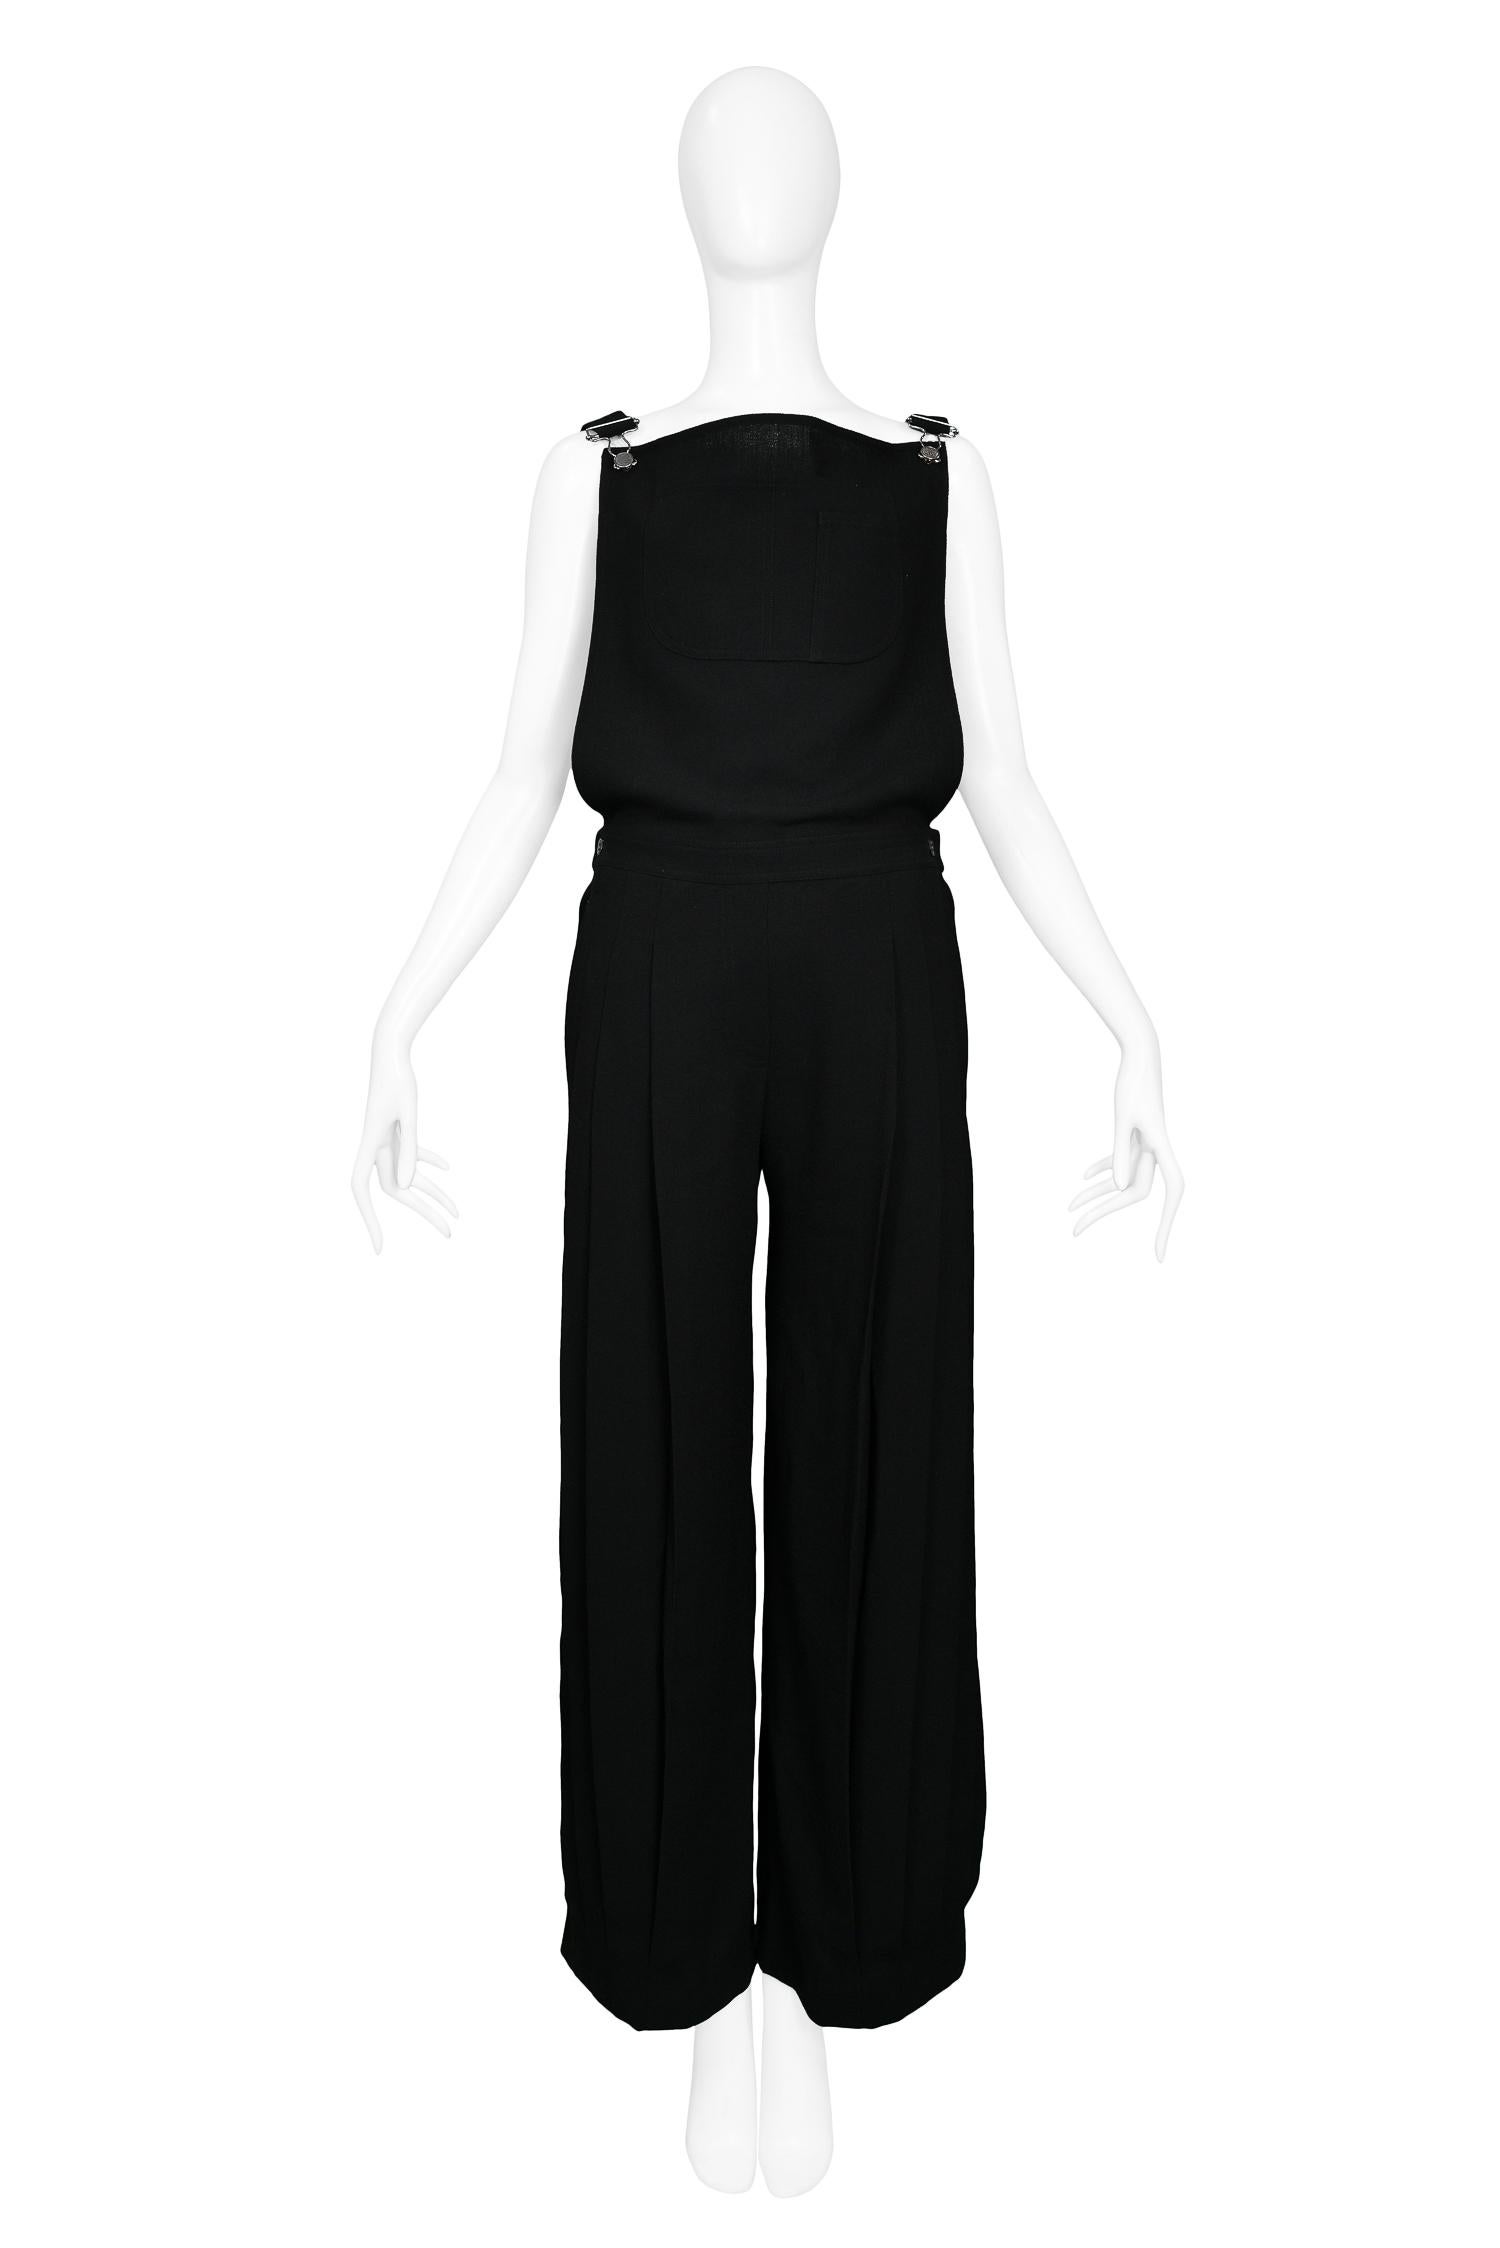 Vintage John Galliano for Christian Dior black wool crepe overalls featuring pleated wide leg pants & front pocket detail. Featured on the Spring/Summer 1999 Runway.

New with Tags; Never Been Worn.

Size: 36